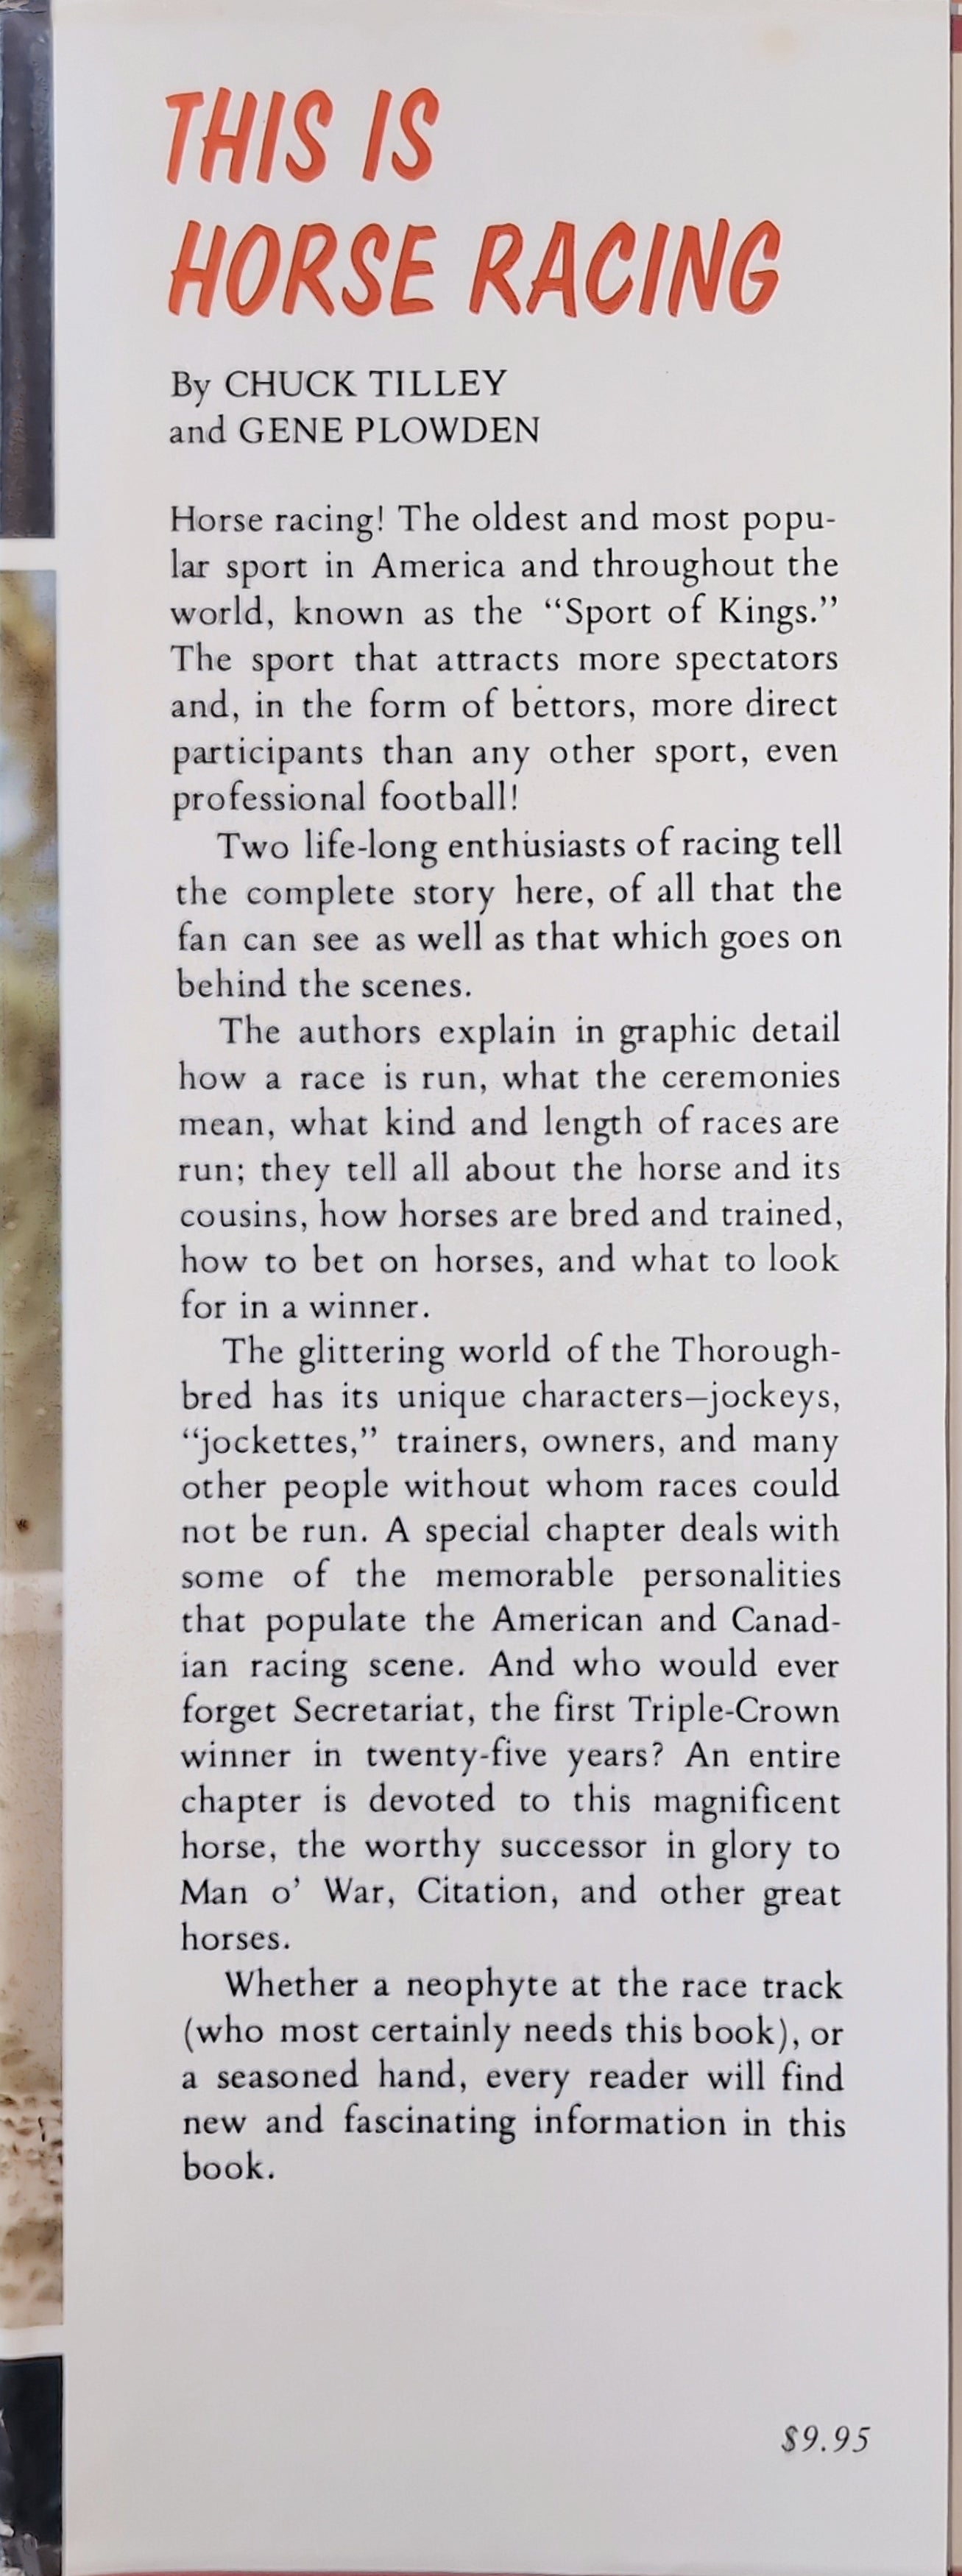 This is Horse Racing